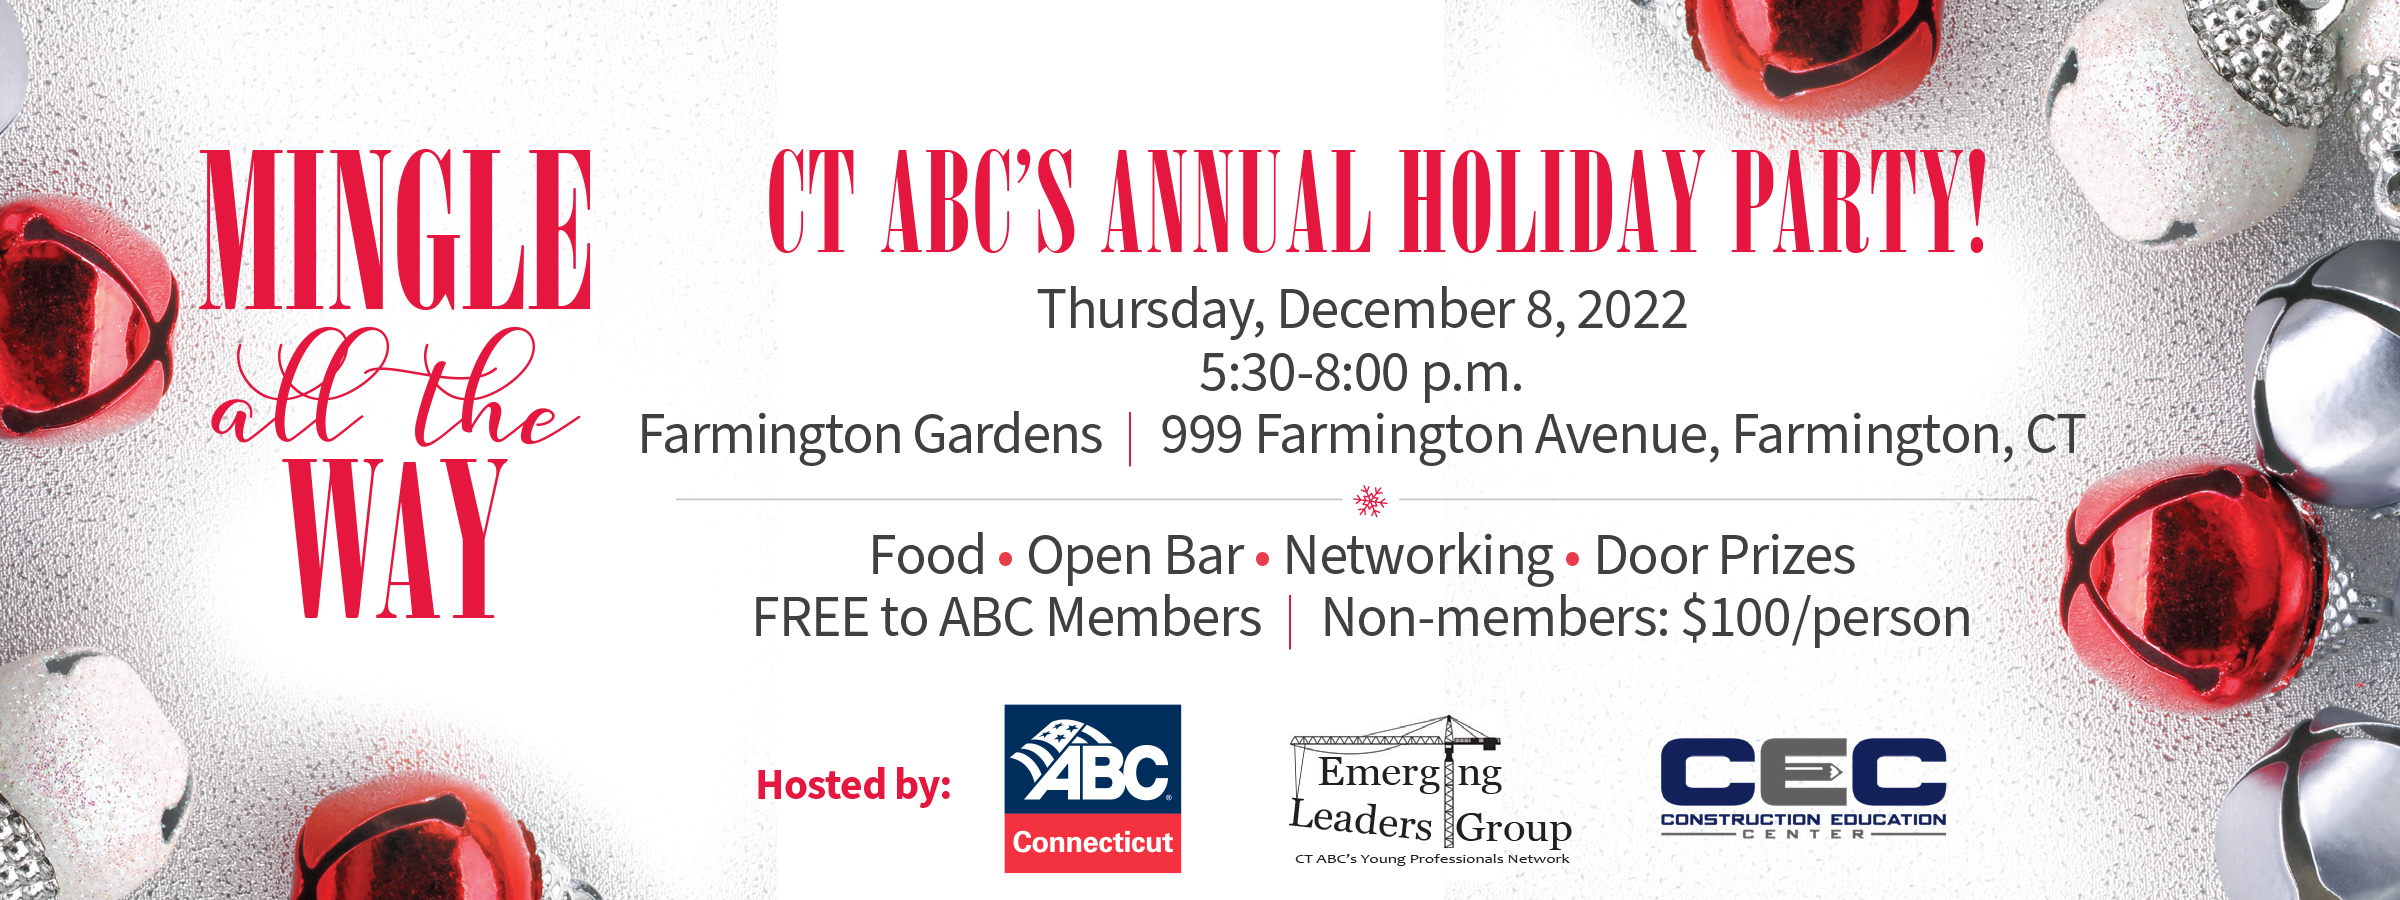 ABC_holiday party banner (002)